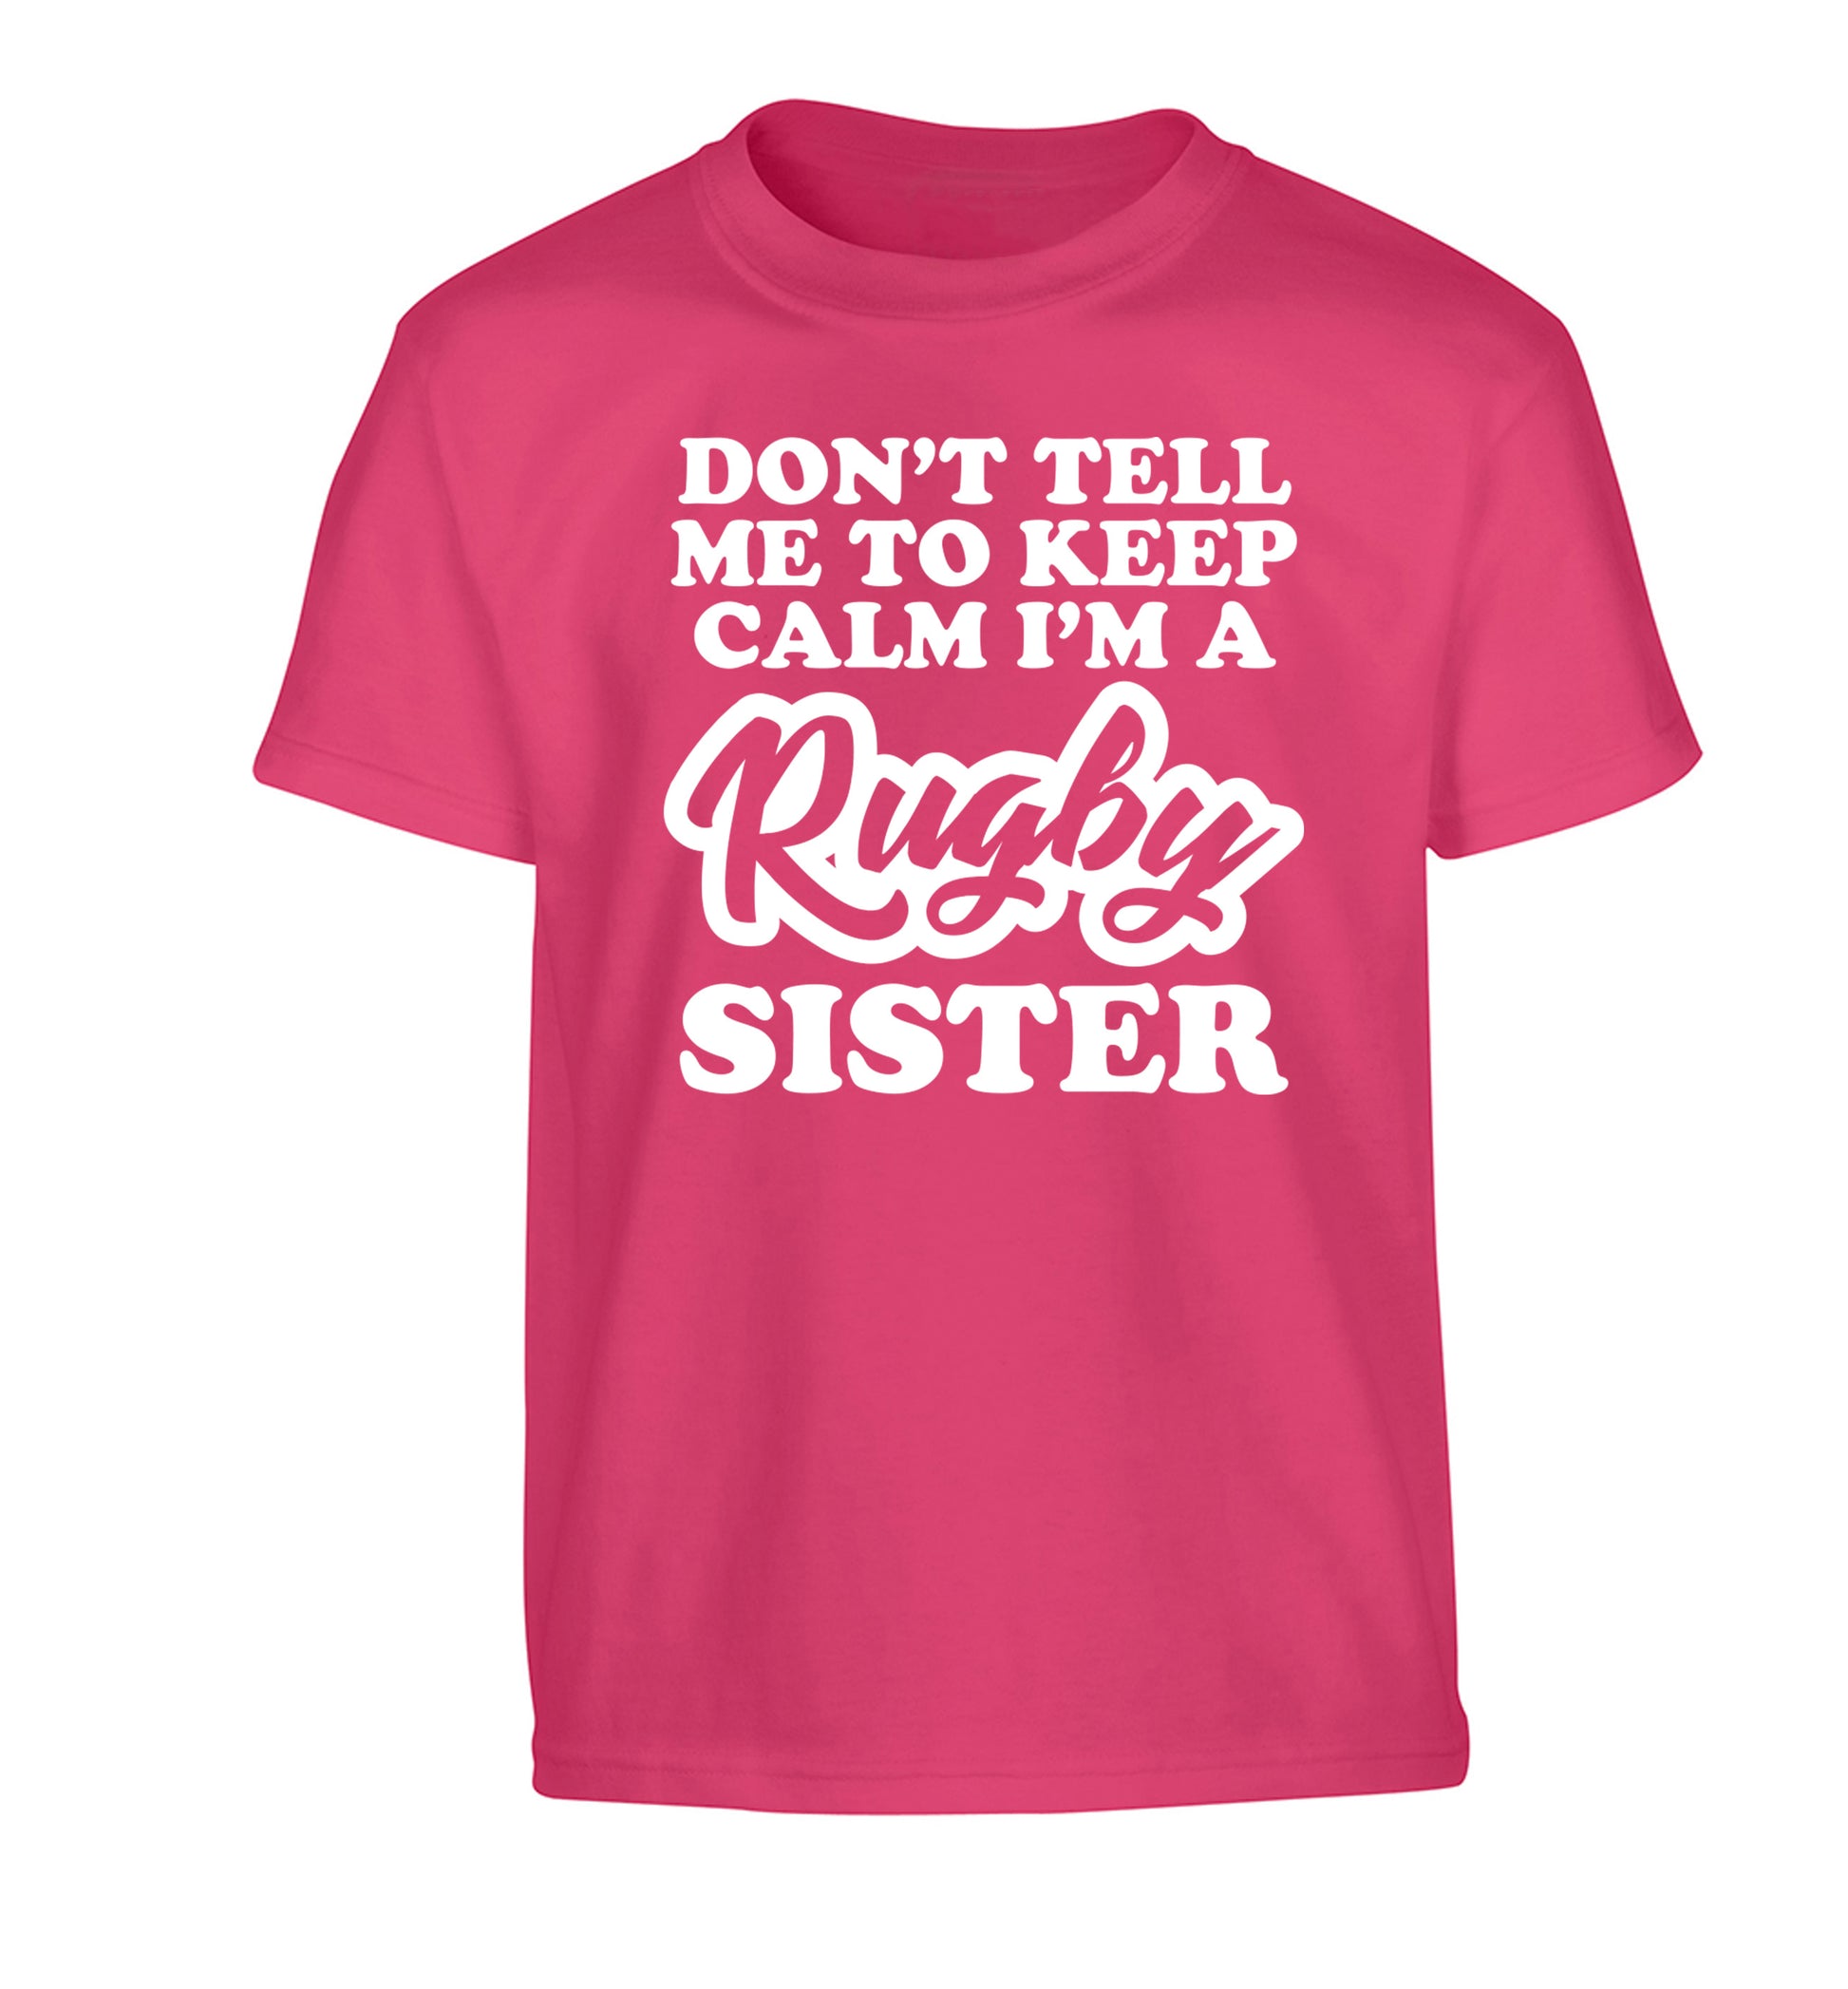 Don't tell me keep calm I'm a rugby sister Children's pink Tshirt 12-13 Years